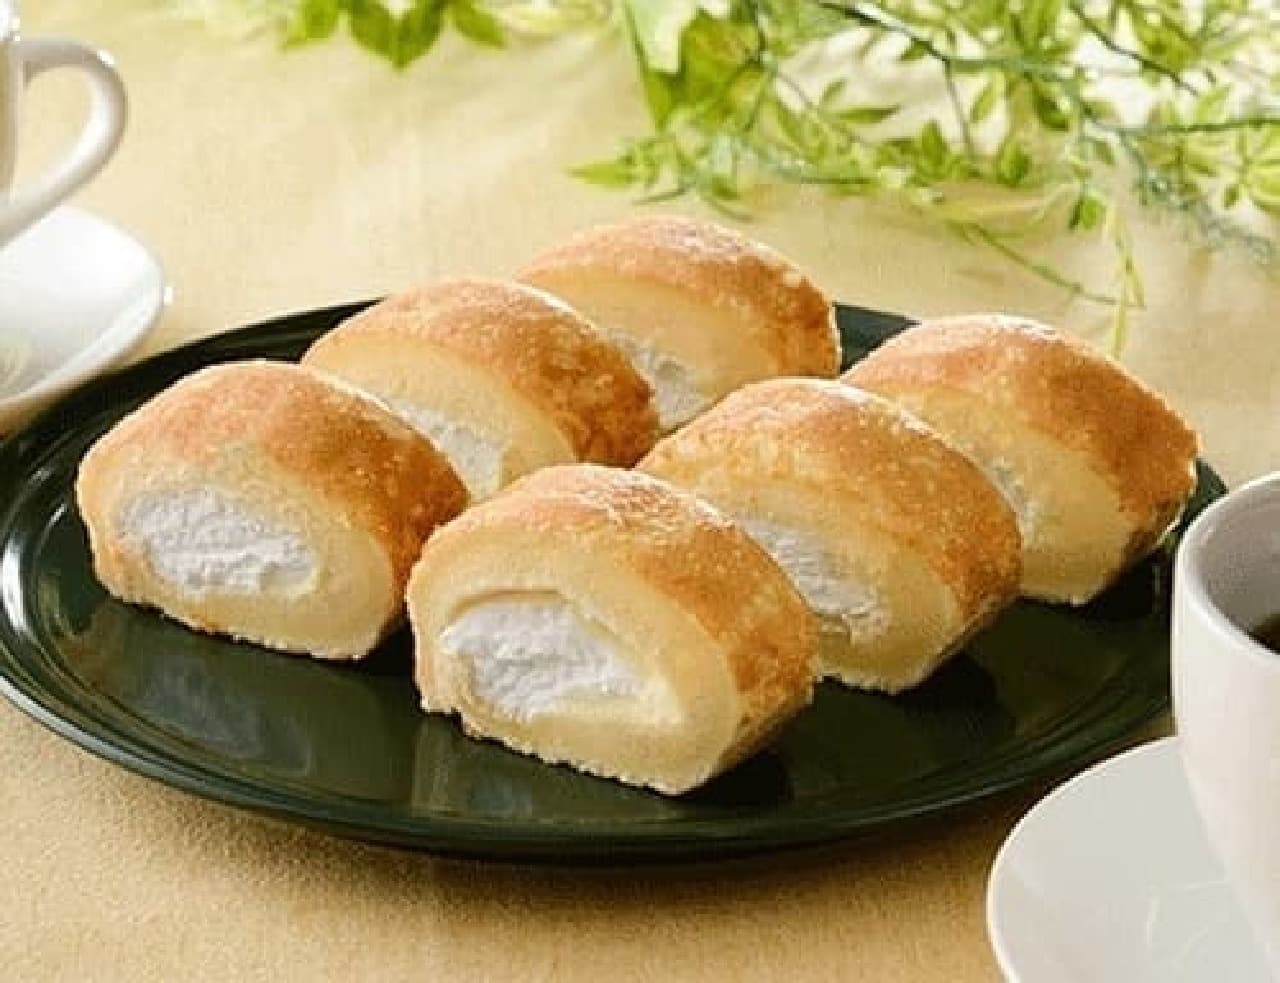 Lawson's "Layered Cheese Mochi Texture Roll"